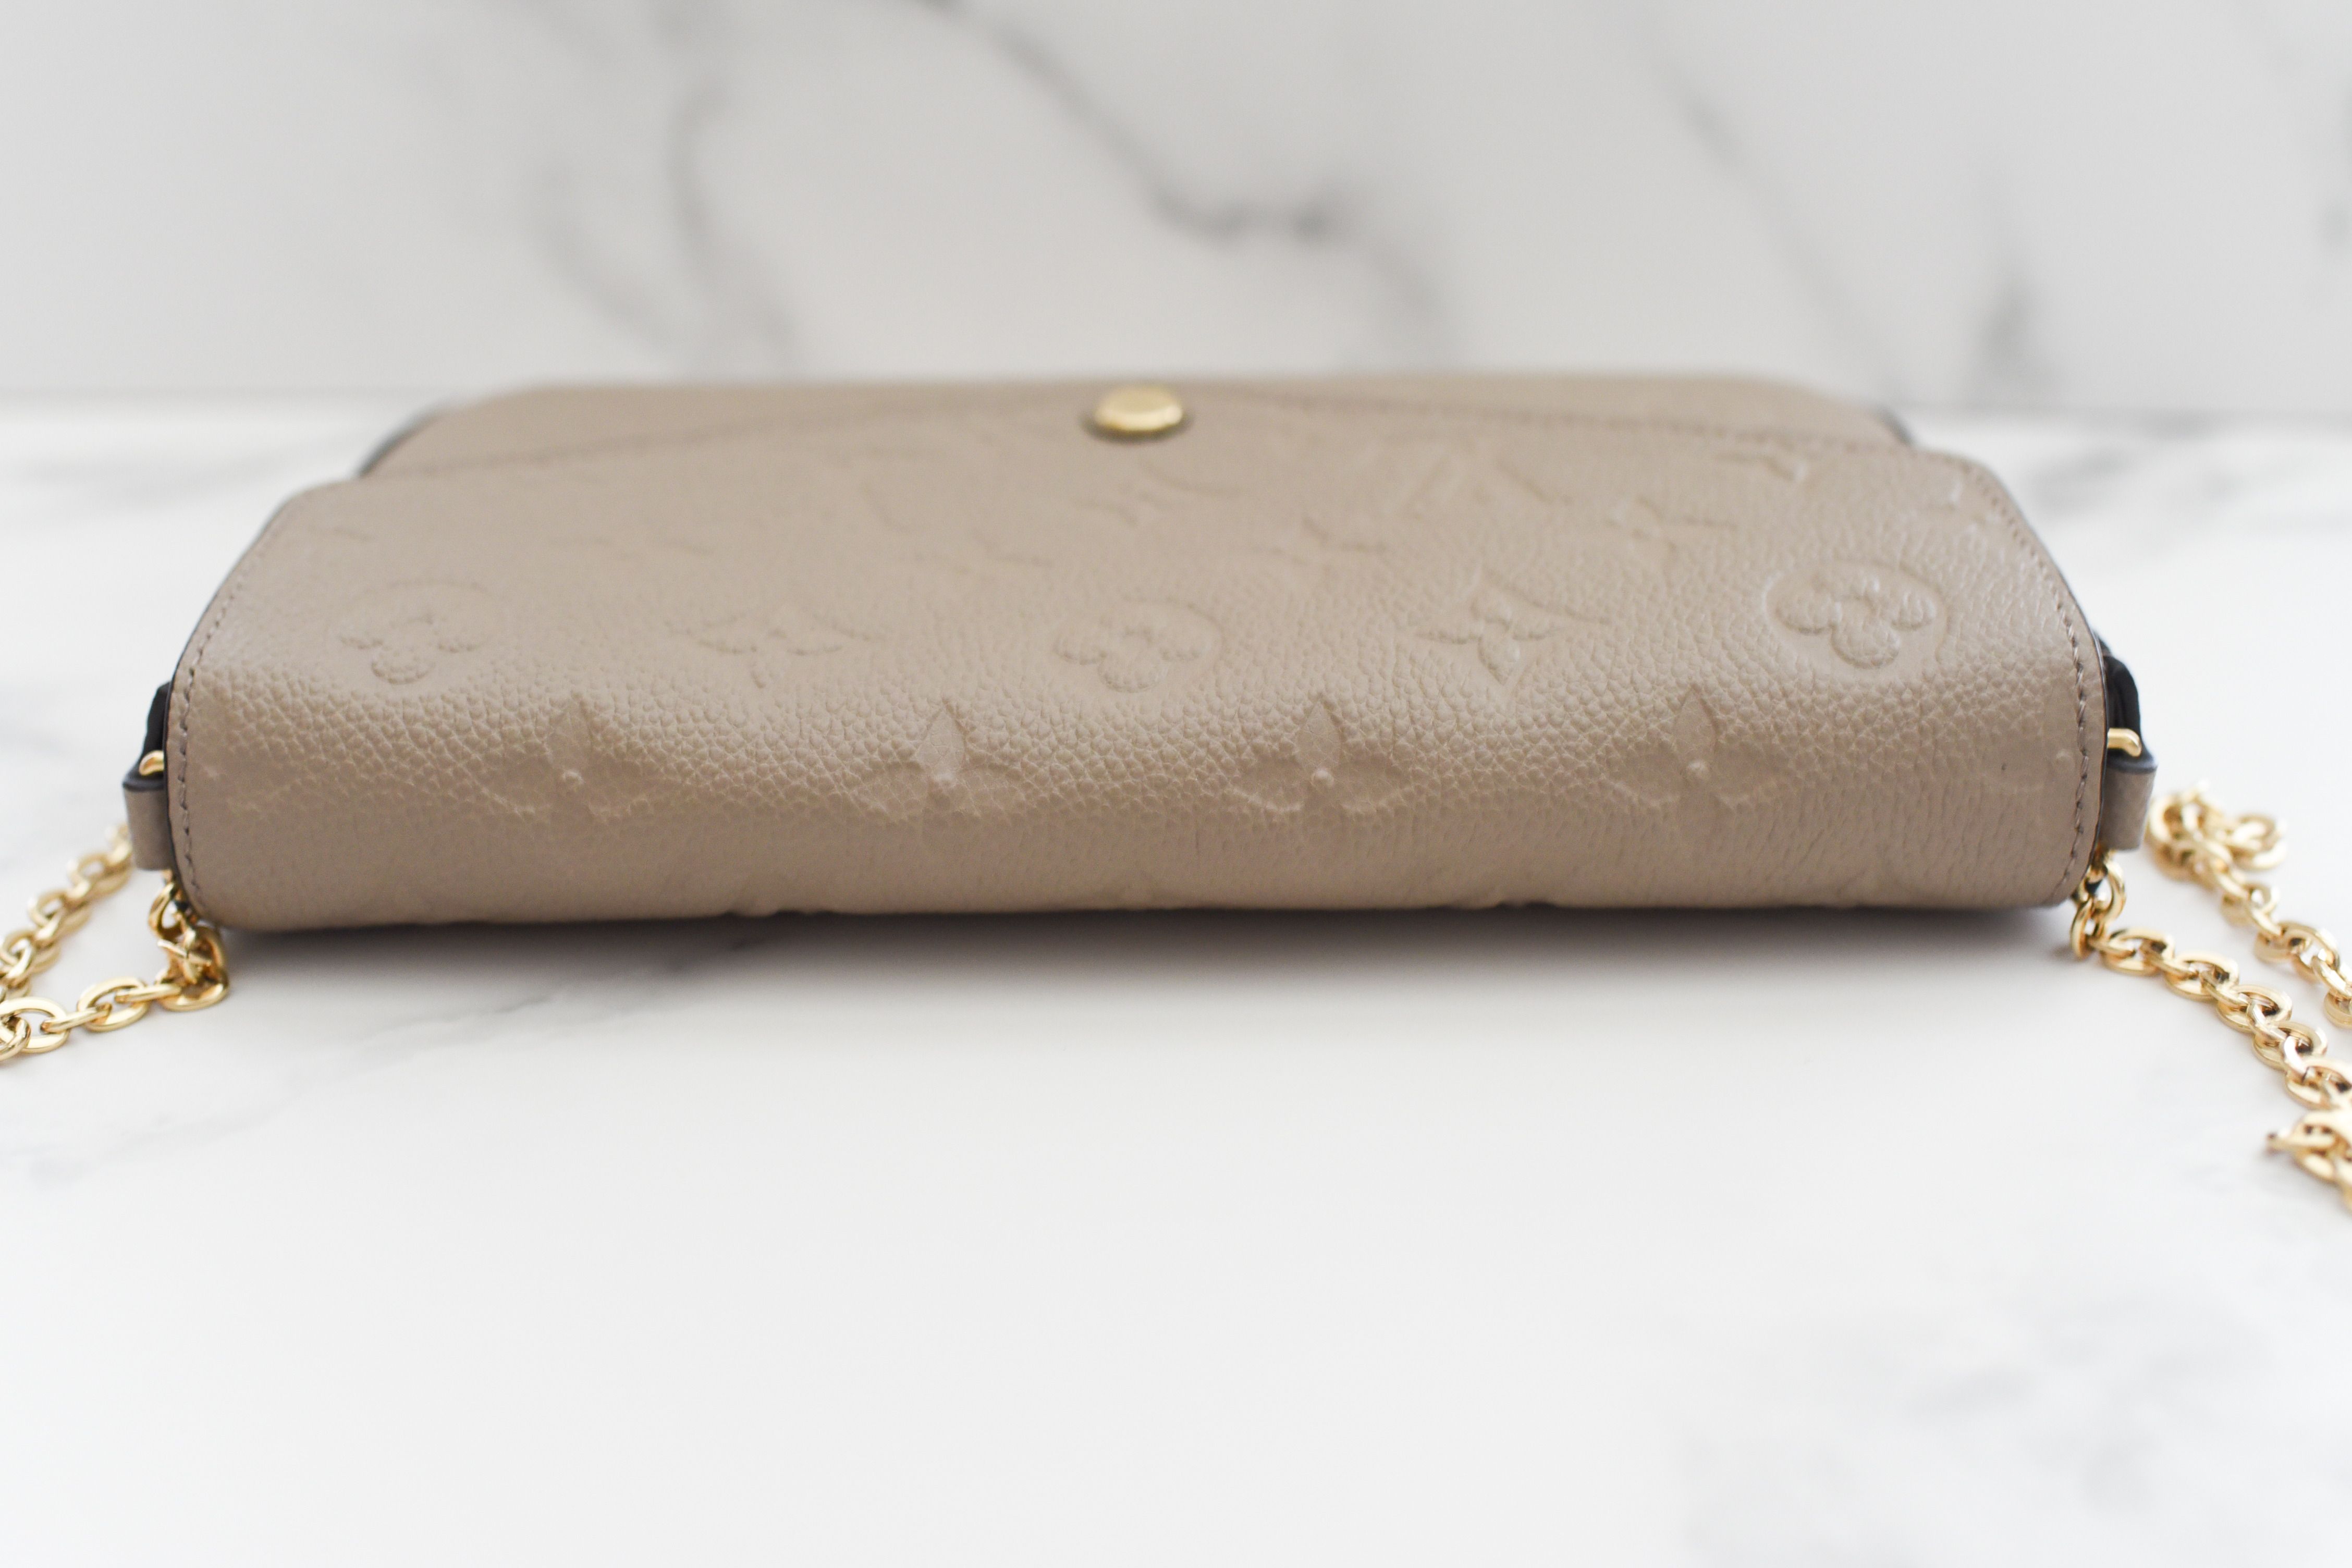 Haute Stuff by Kimberly - LV Felicie in Turtle Dove Detailed Features: ‭8.3  x 4.7 x 1.2 inches ‬ ‭(length x Height x Width)‬ * ‭Tourterelle Beige‬ *  ‭Monogram Empreinte embossed supple‬